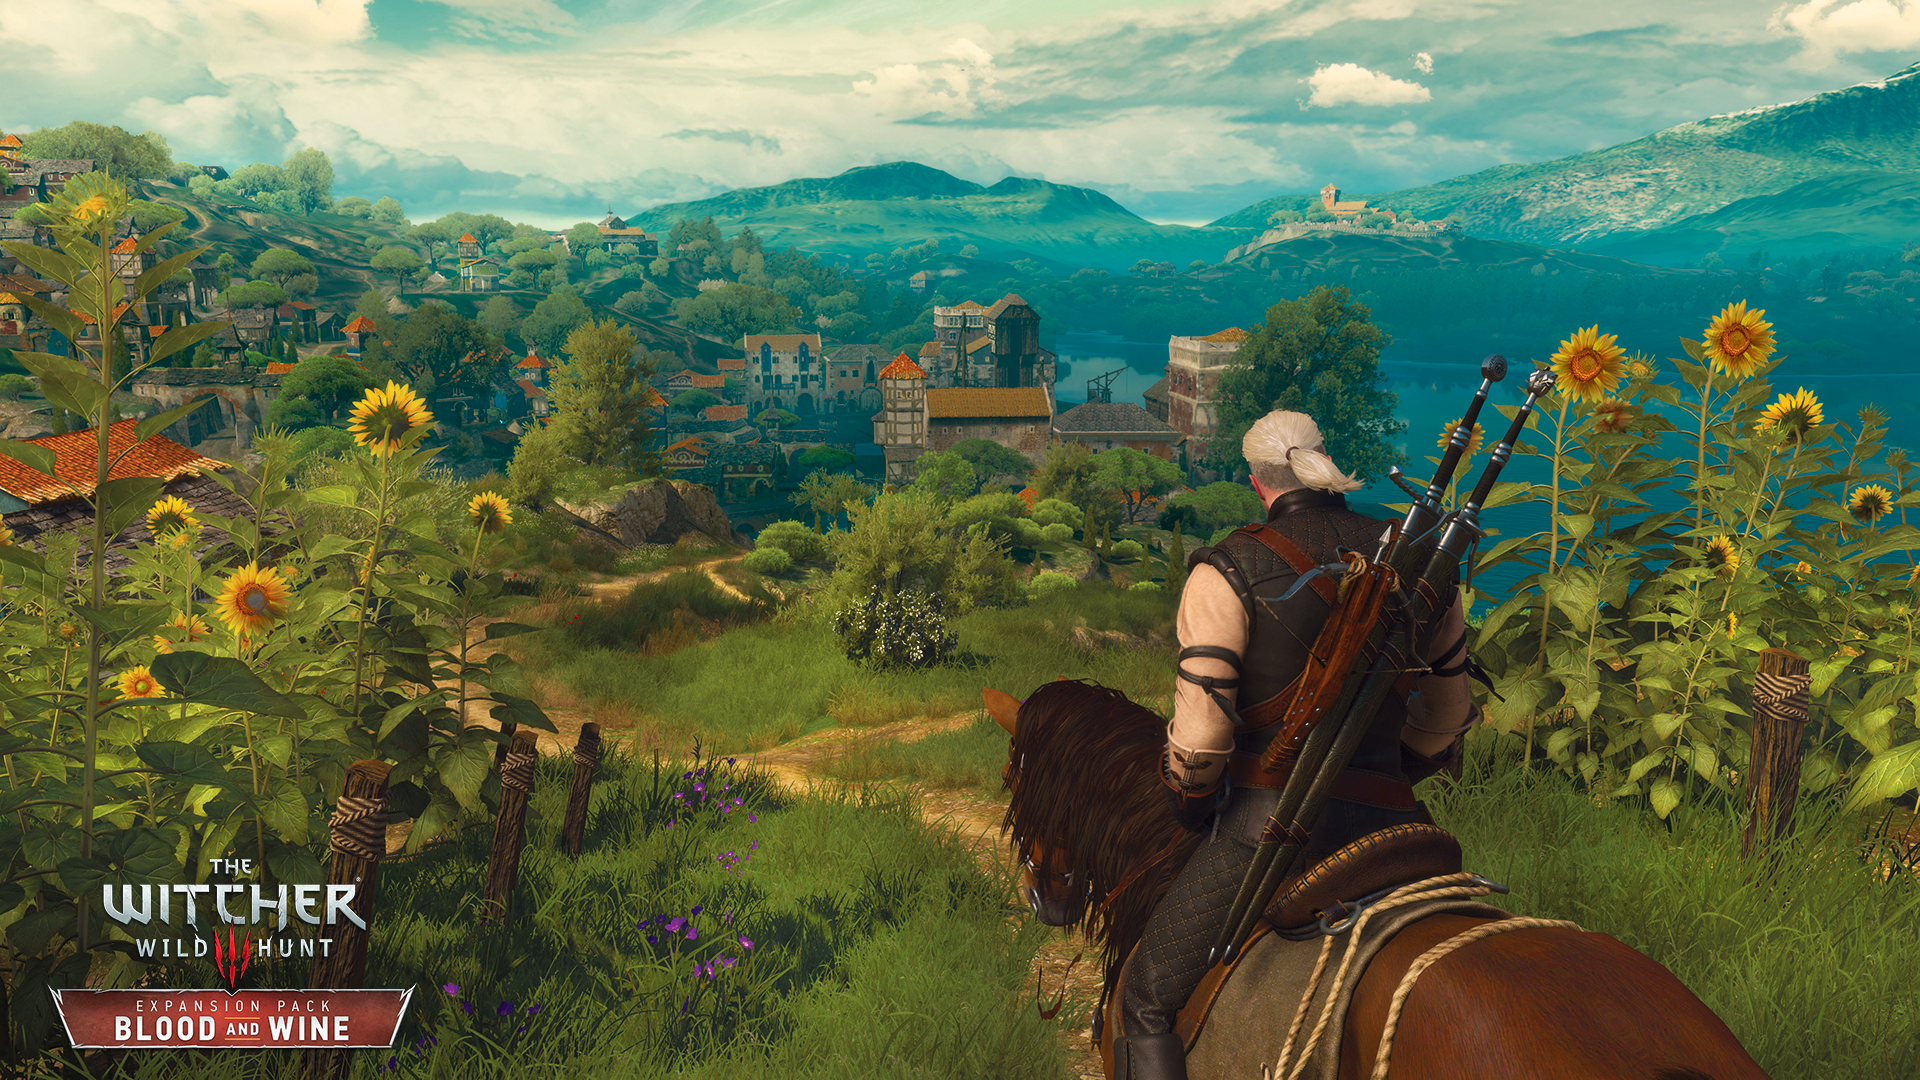 The Witcher The Witcher 3 Wild Hunt Geralt Of Rivia DLC Video Games The Witcher 3 Wild Hunt Blood An 1920x1080